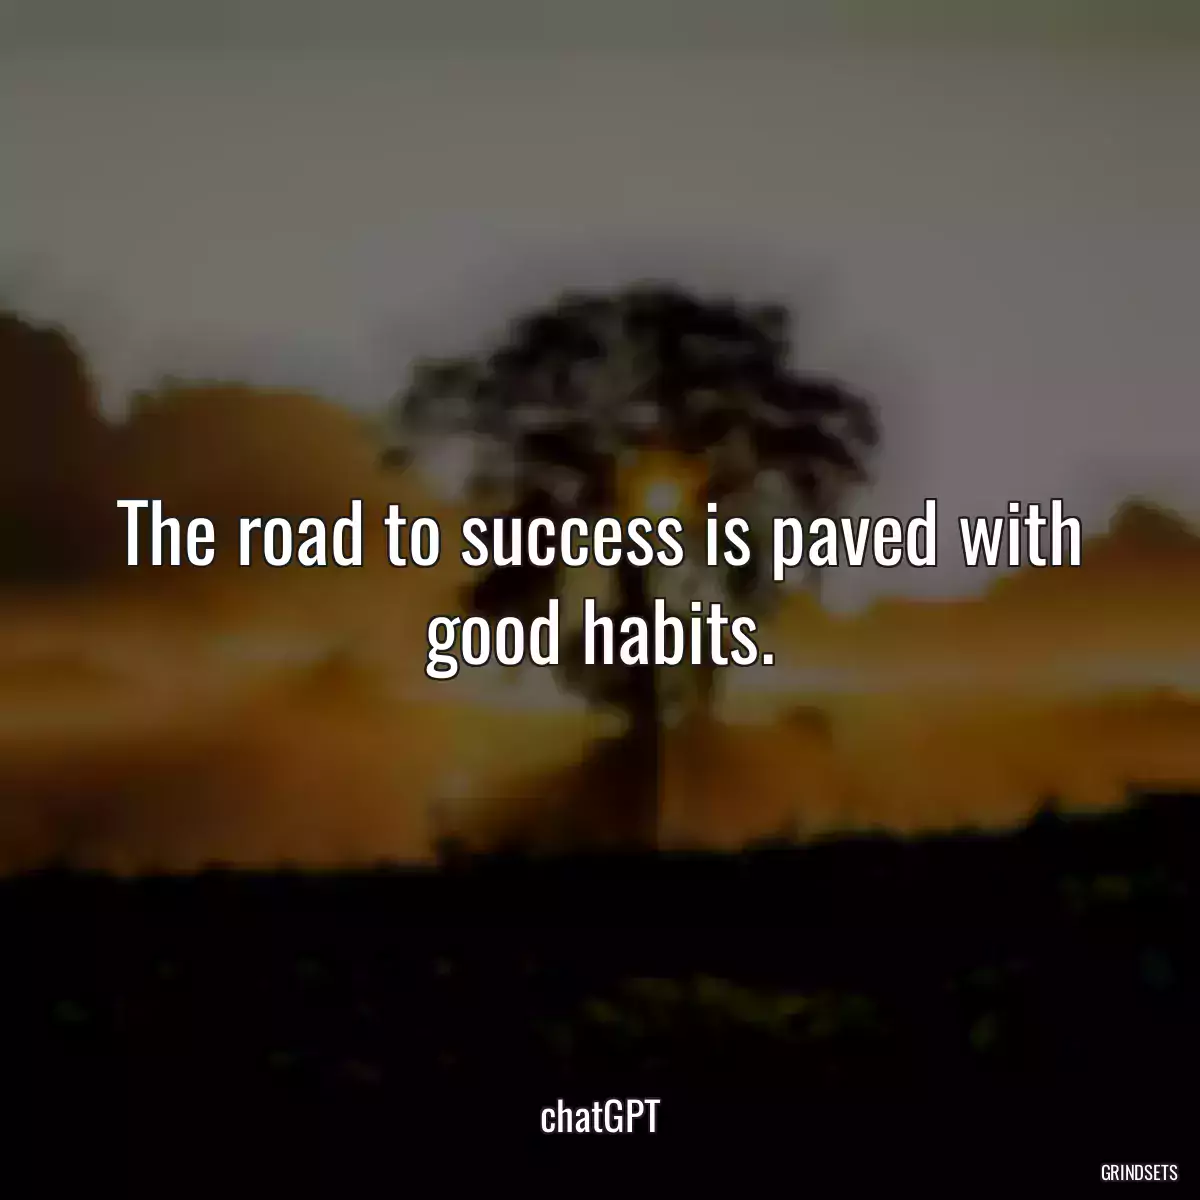 The road to success is paved with good habits.